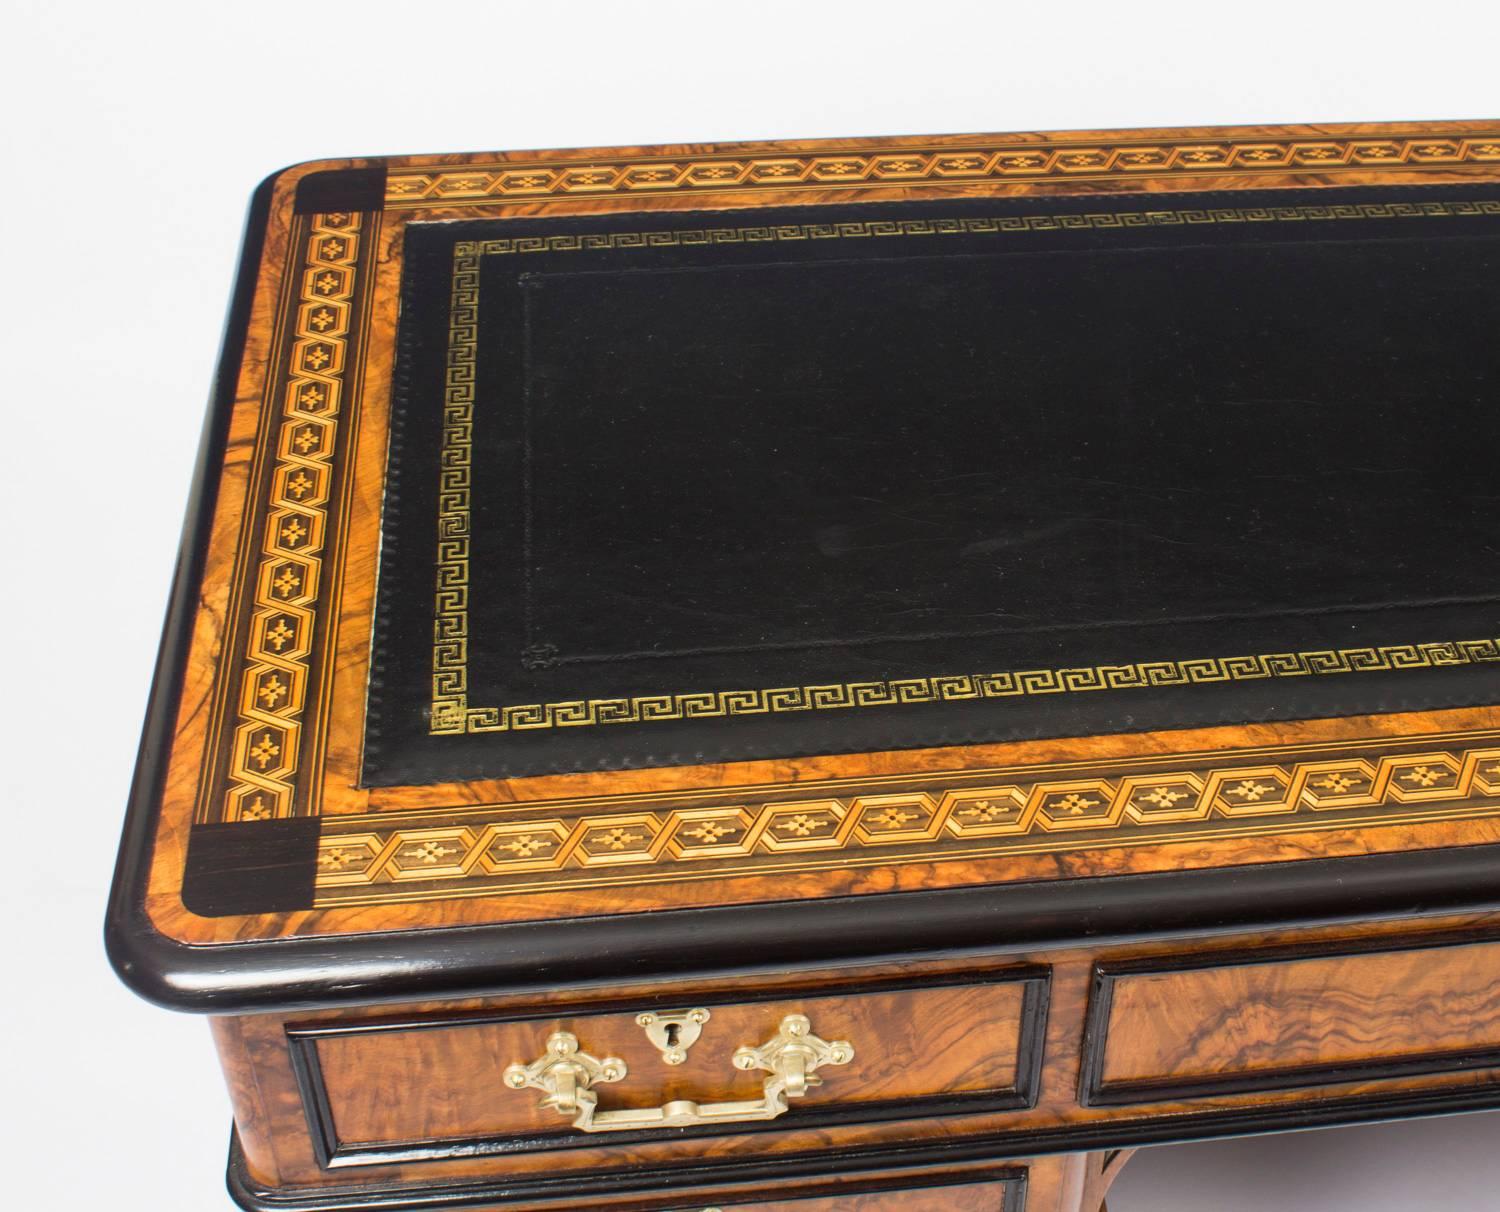 This is a superb antique Victorian burr walnut and ebonised twin pedestal desk, circa 1870 in date.

It is made from fabulous burr walnut, the rounded rectangular top with a fabulous inset gold tooled black leather writing surface, it features an